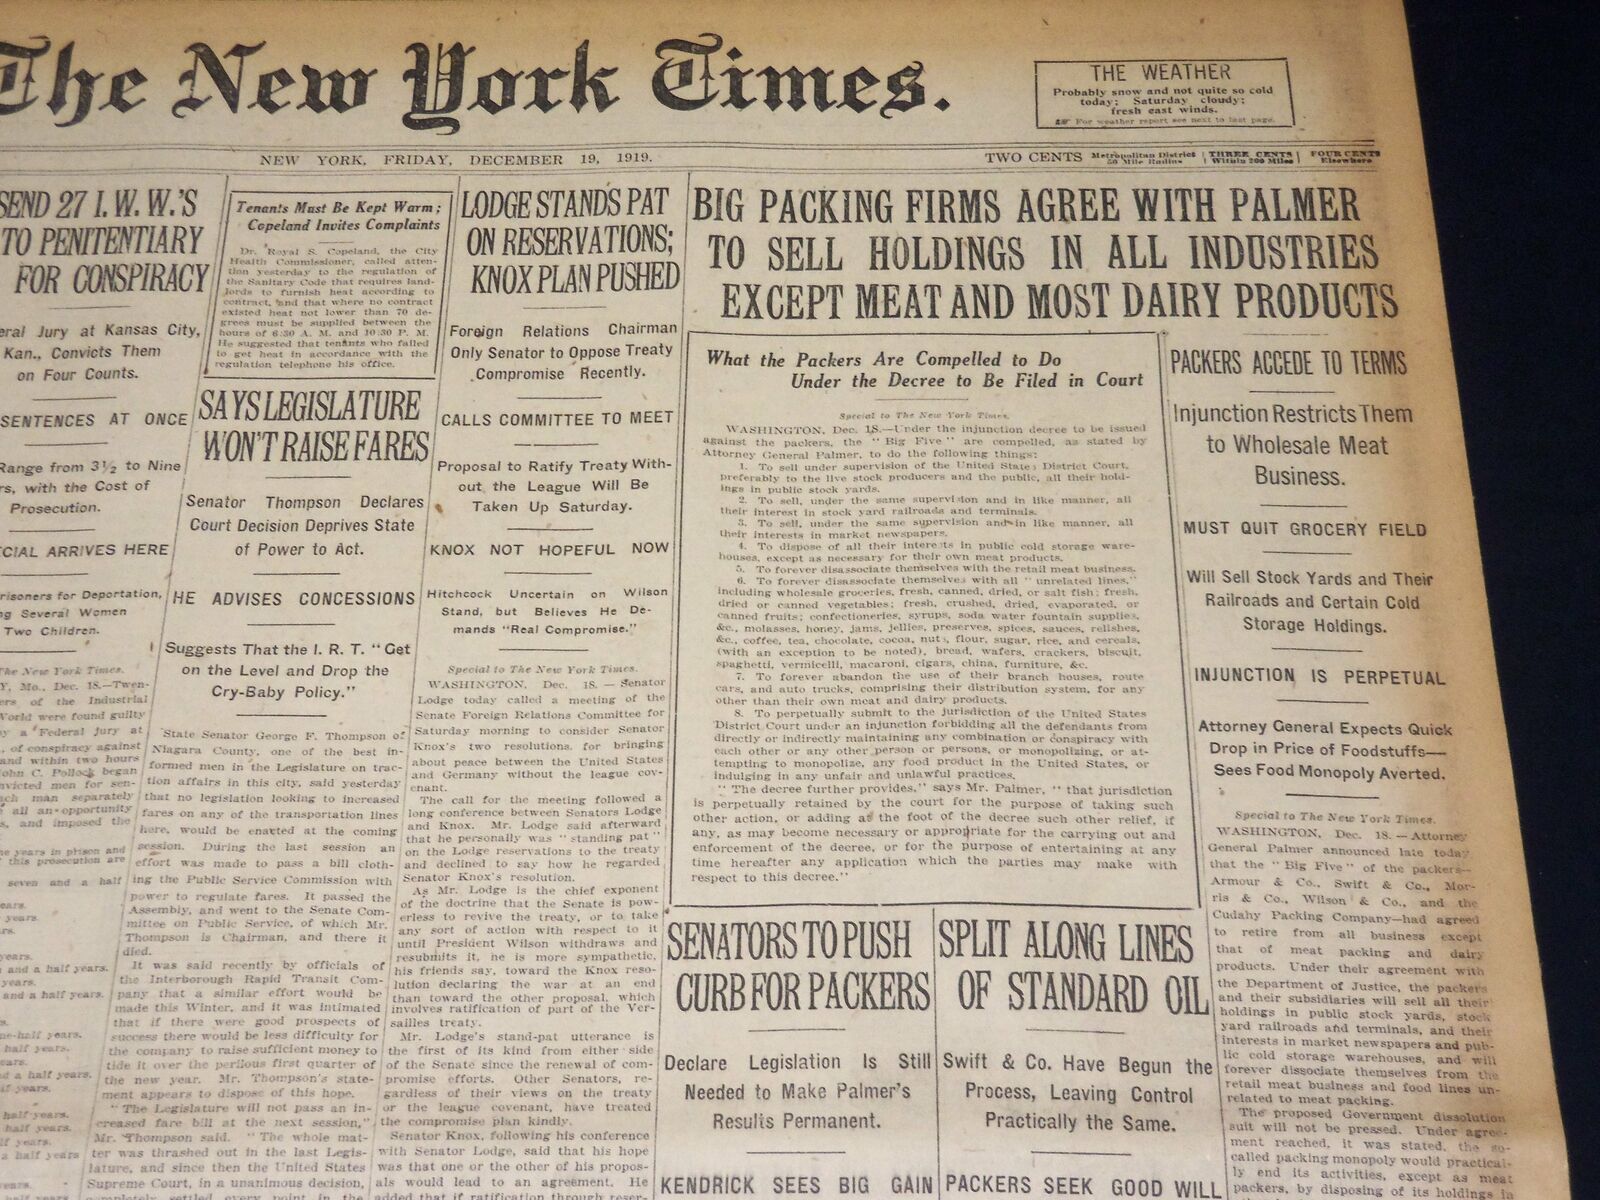 1919 DEC 19 NEW YORK TIMES - BIG PACKING FIRMS AGREE TO SELL HOLDINGS - NT 8538